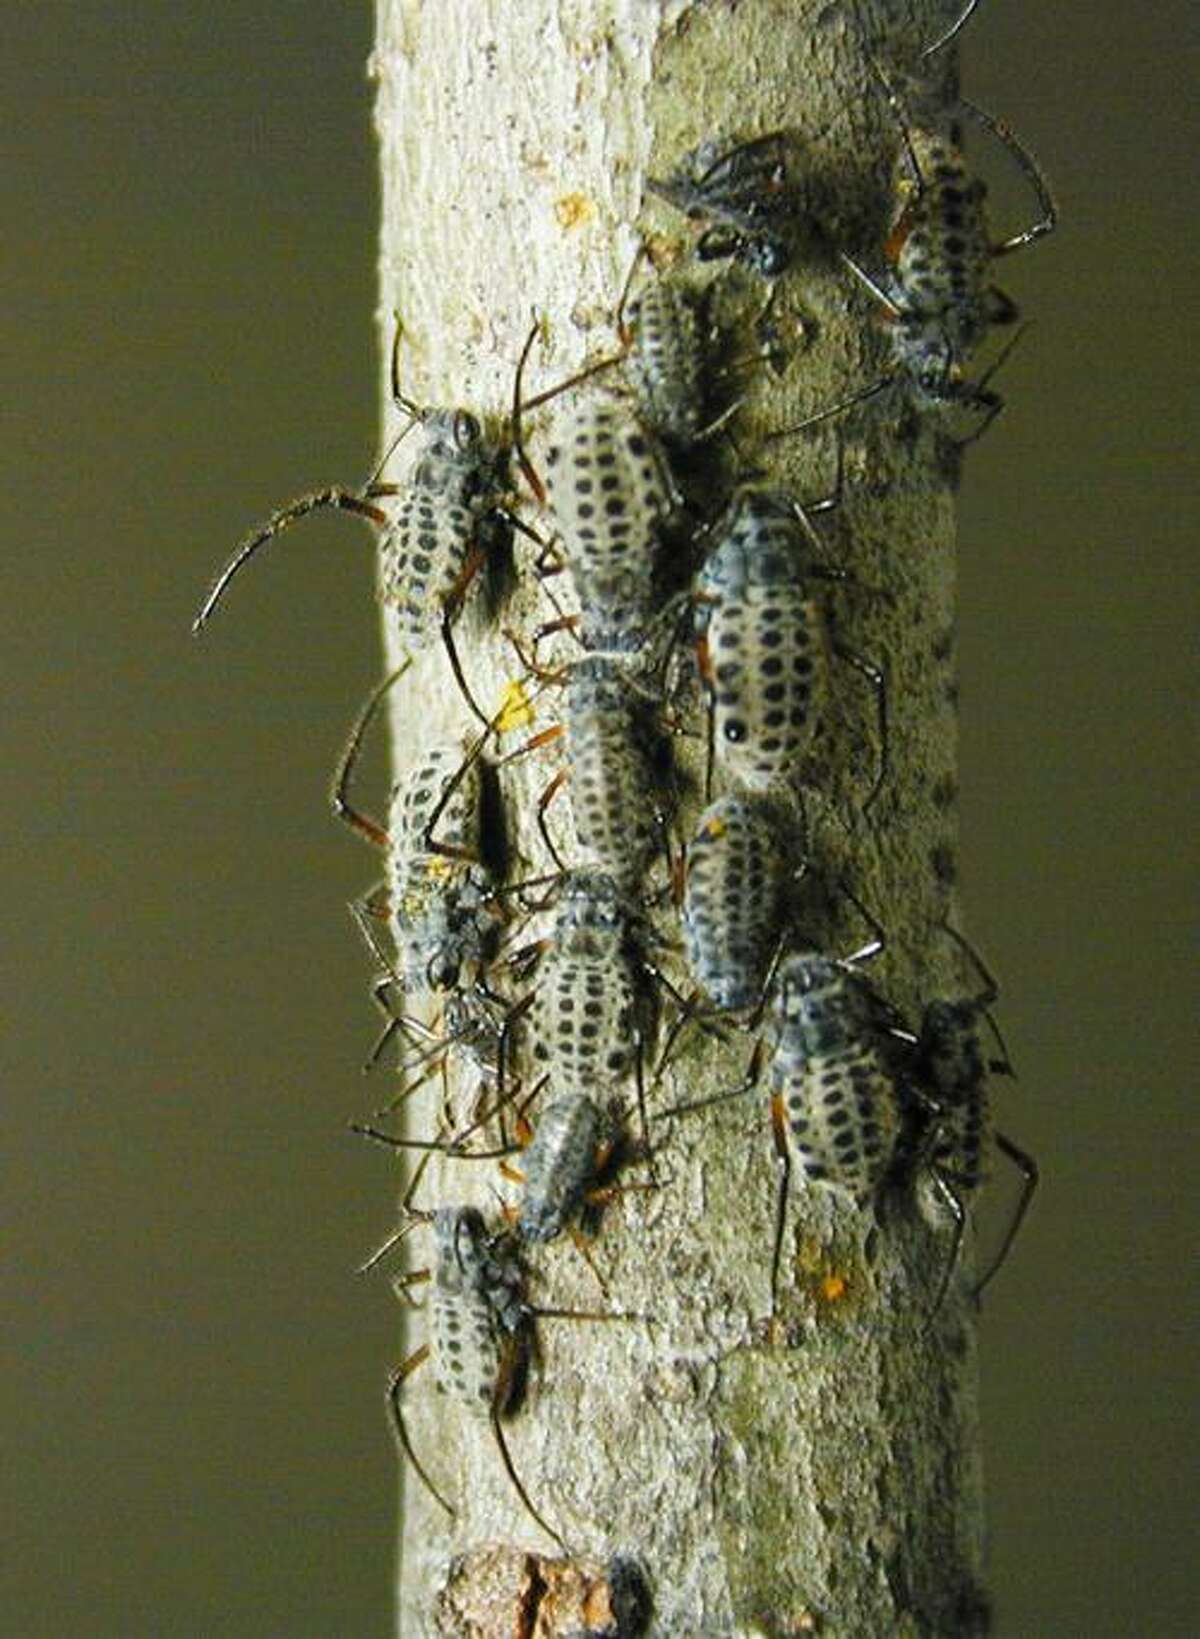 Typically, you can find Giant Bark Aphids huddled up together on the branches and trunks of trees. In small numbers they do not do enough damage to warrant a treatment. However, when they are in large numbers, and when damage does occur and is visible, try to select the least toxic insecticide as a best management practice.